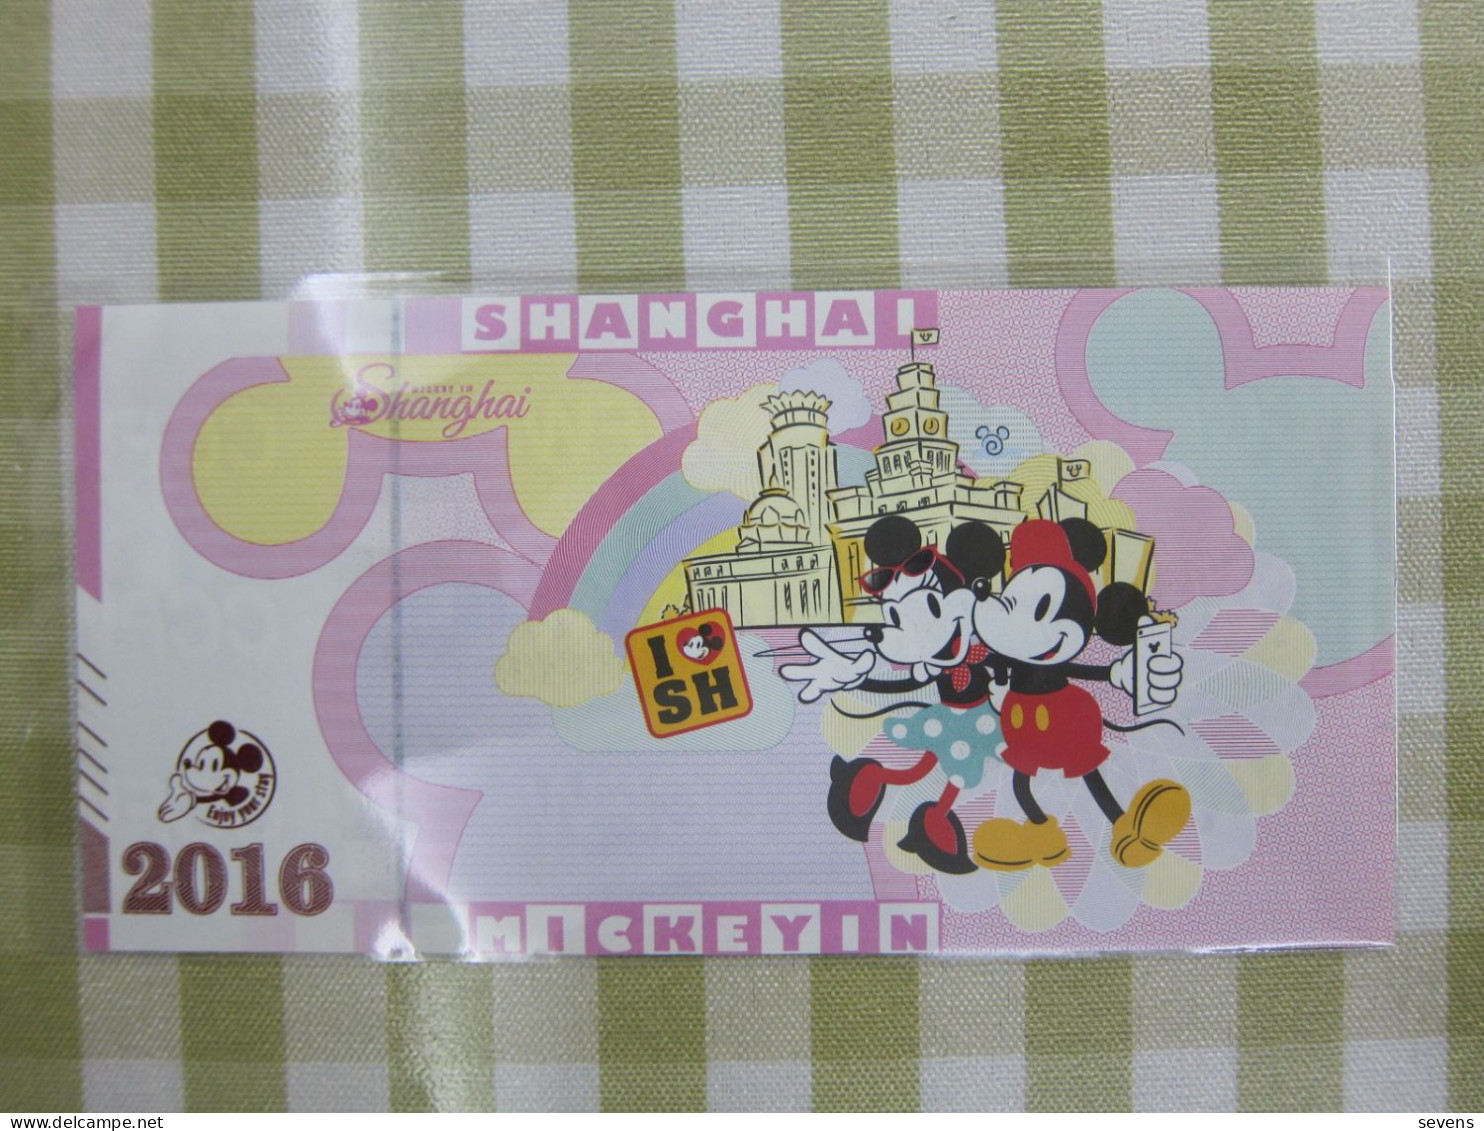 Trial Printed Banknote From Manufacture, Disneyland Shanghai, Issued By China Golddeal Investment Co. Ltd,2016 - Chine